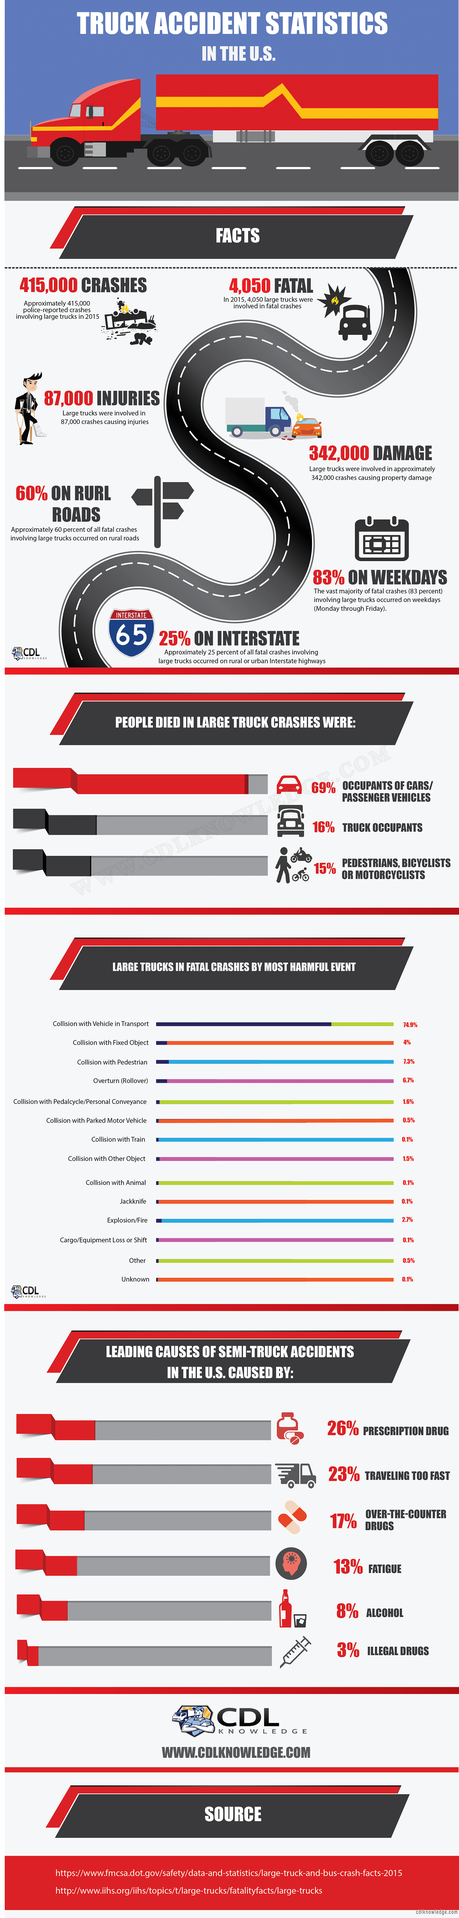 Truck Accident Statistics in the U.S. infographic